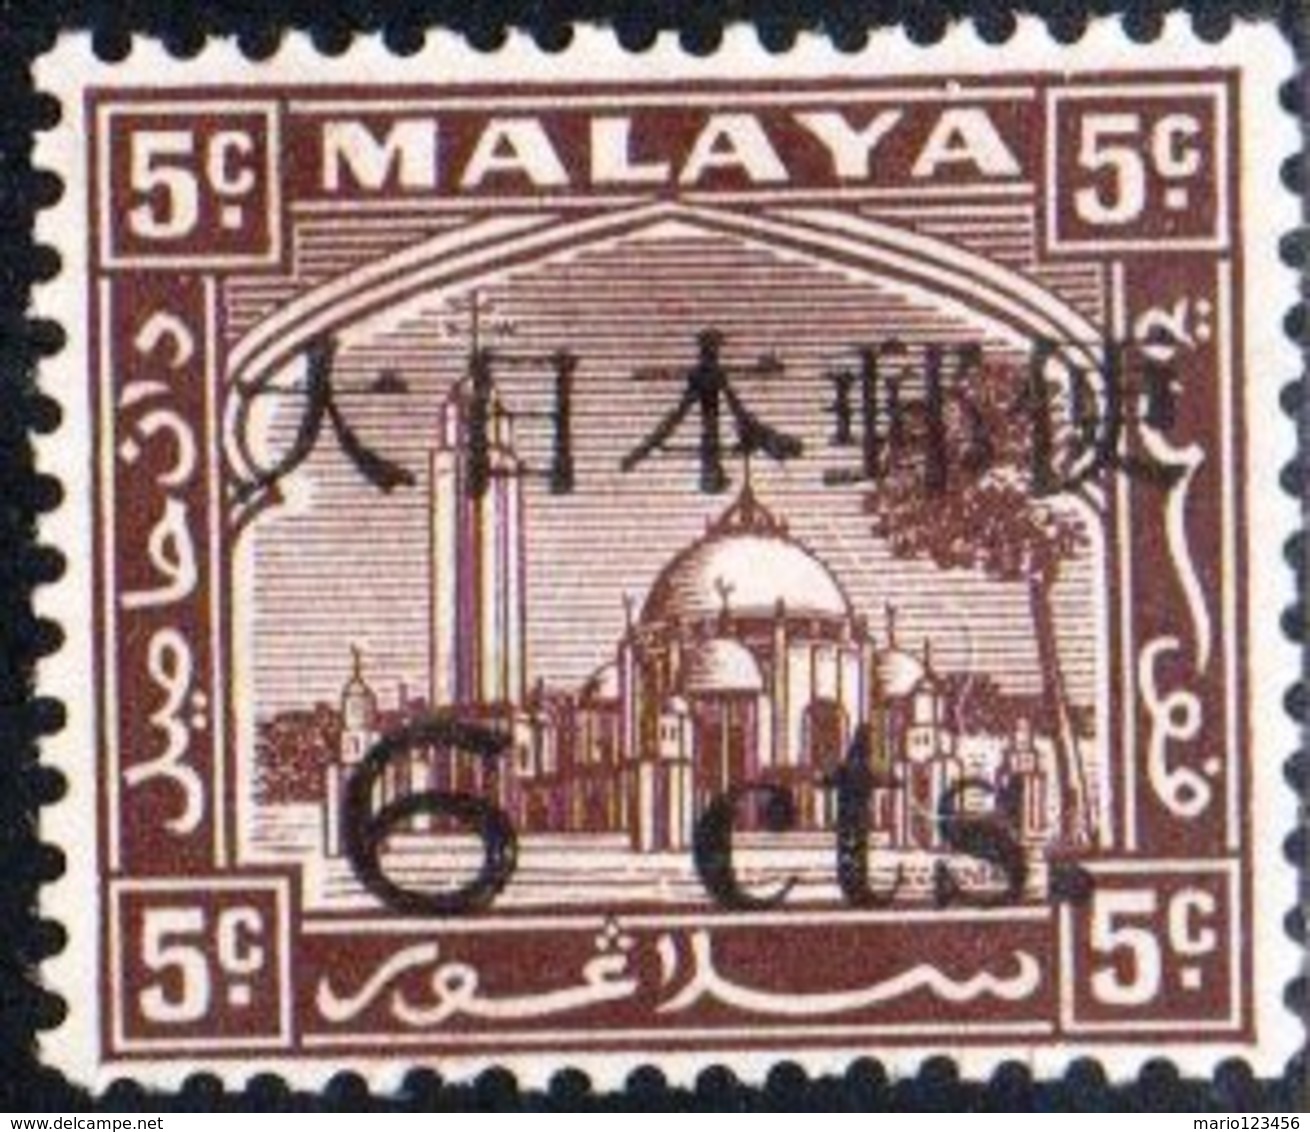 MALAYA, OCCUPAZIONE GIAPPONESE, JAPANESE OCCUPATION, 1943, FRANCOBOLLO NUOVO (MLH*) Scott N33 - Malesia (1964-...)